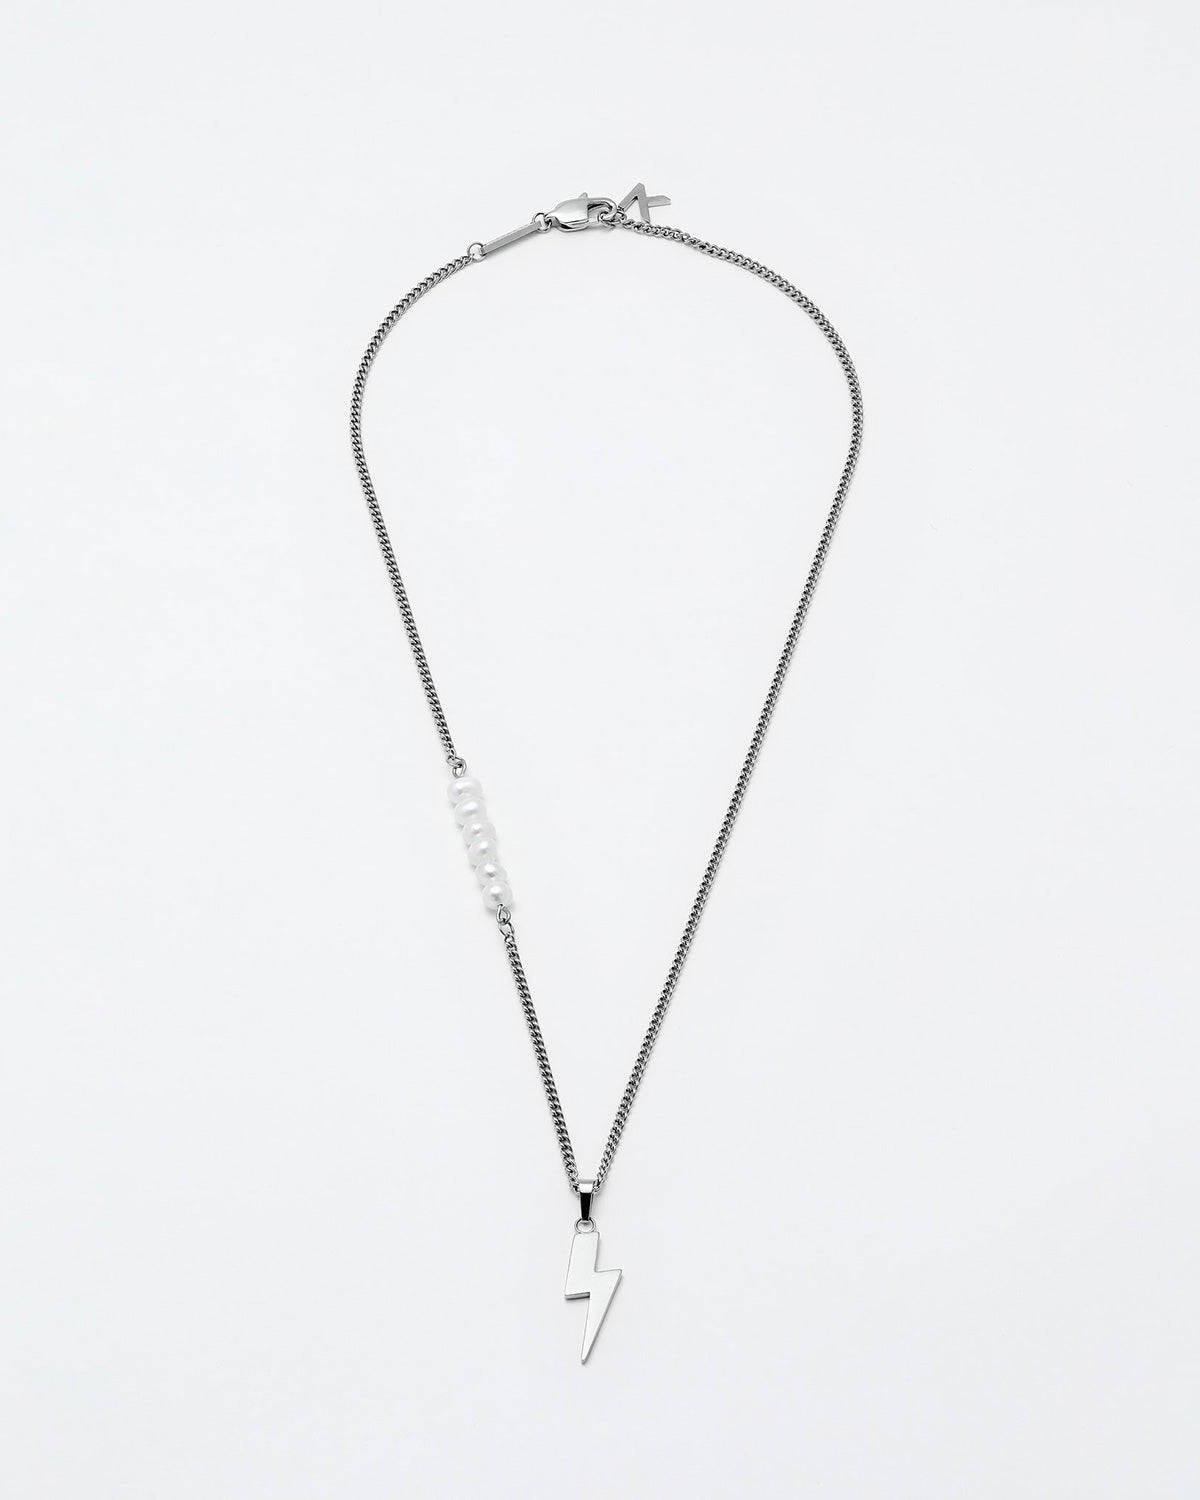 KLASSE 14 Duality Lightning Necklace - Silver & White Pearl